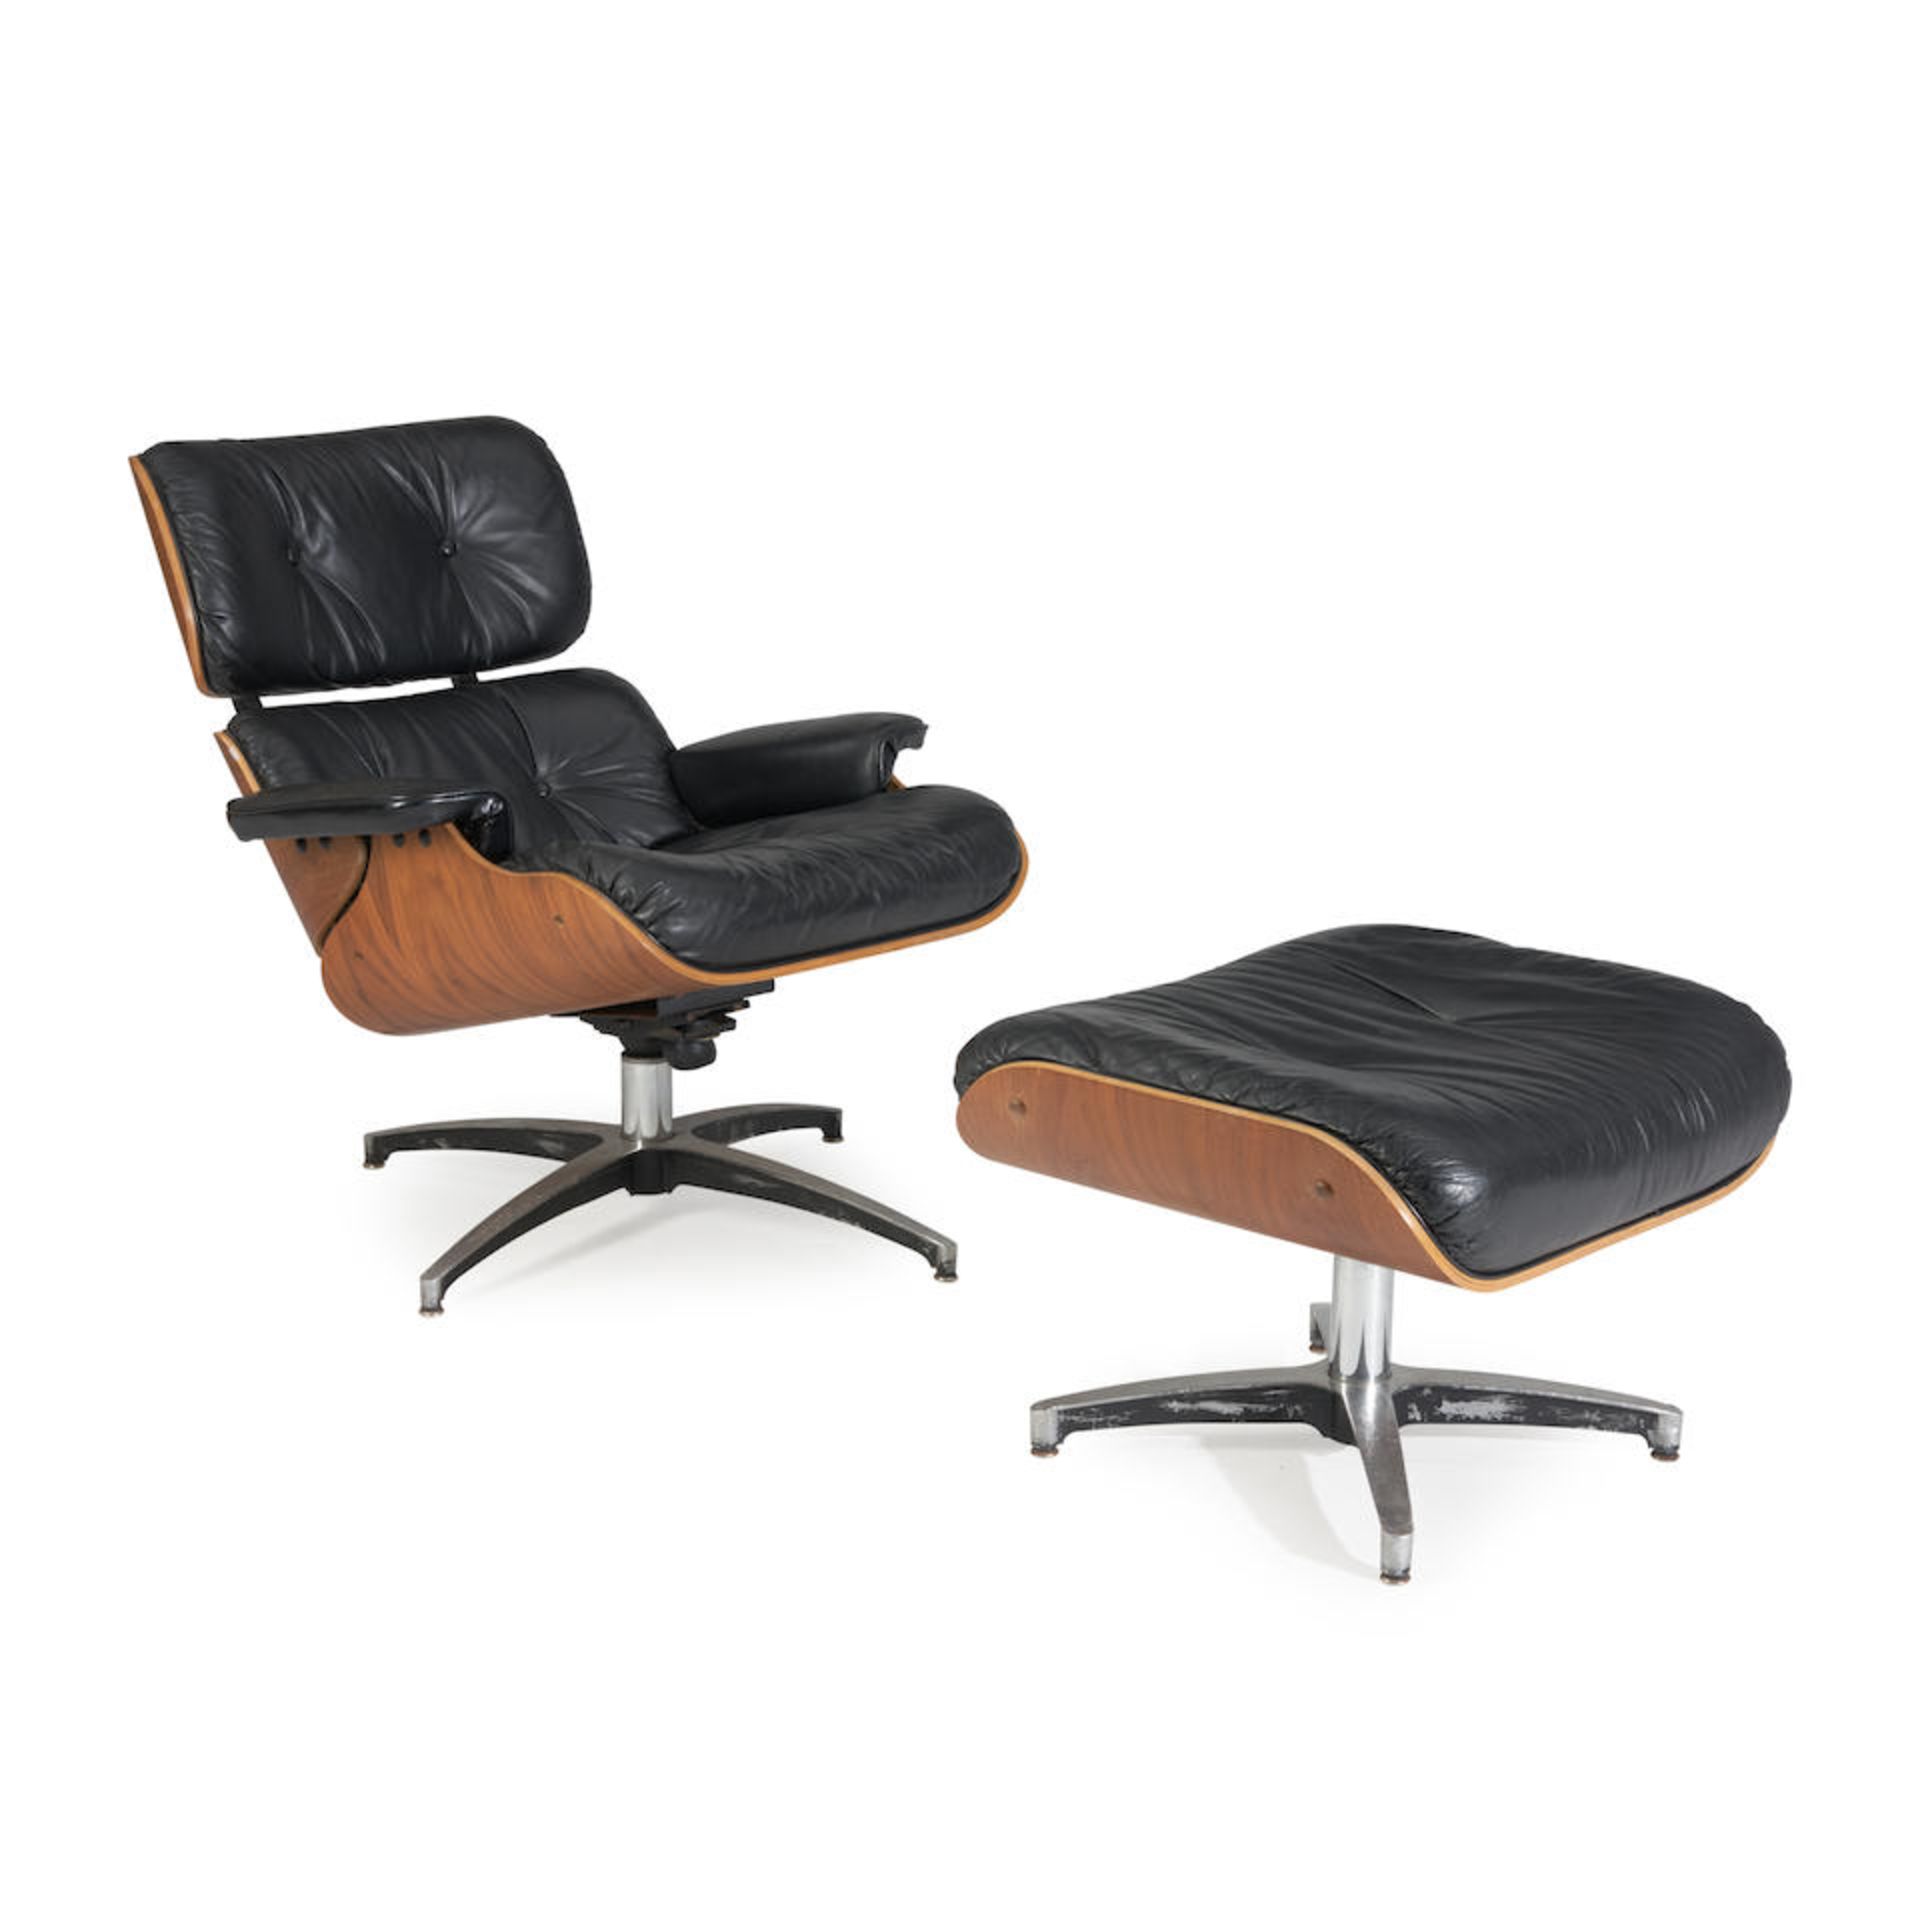 EAMES-STYLE LOUNGE CHAIR AND OTTOMAN